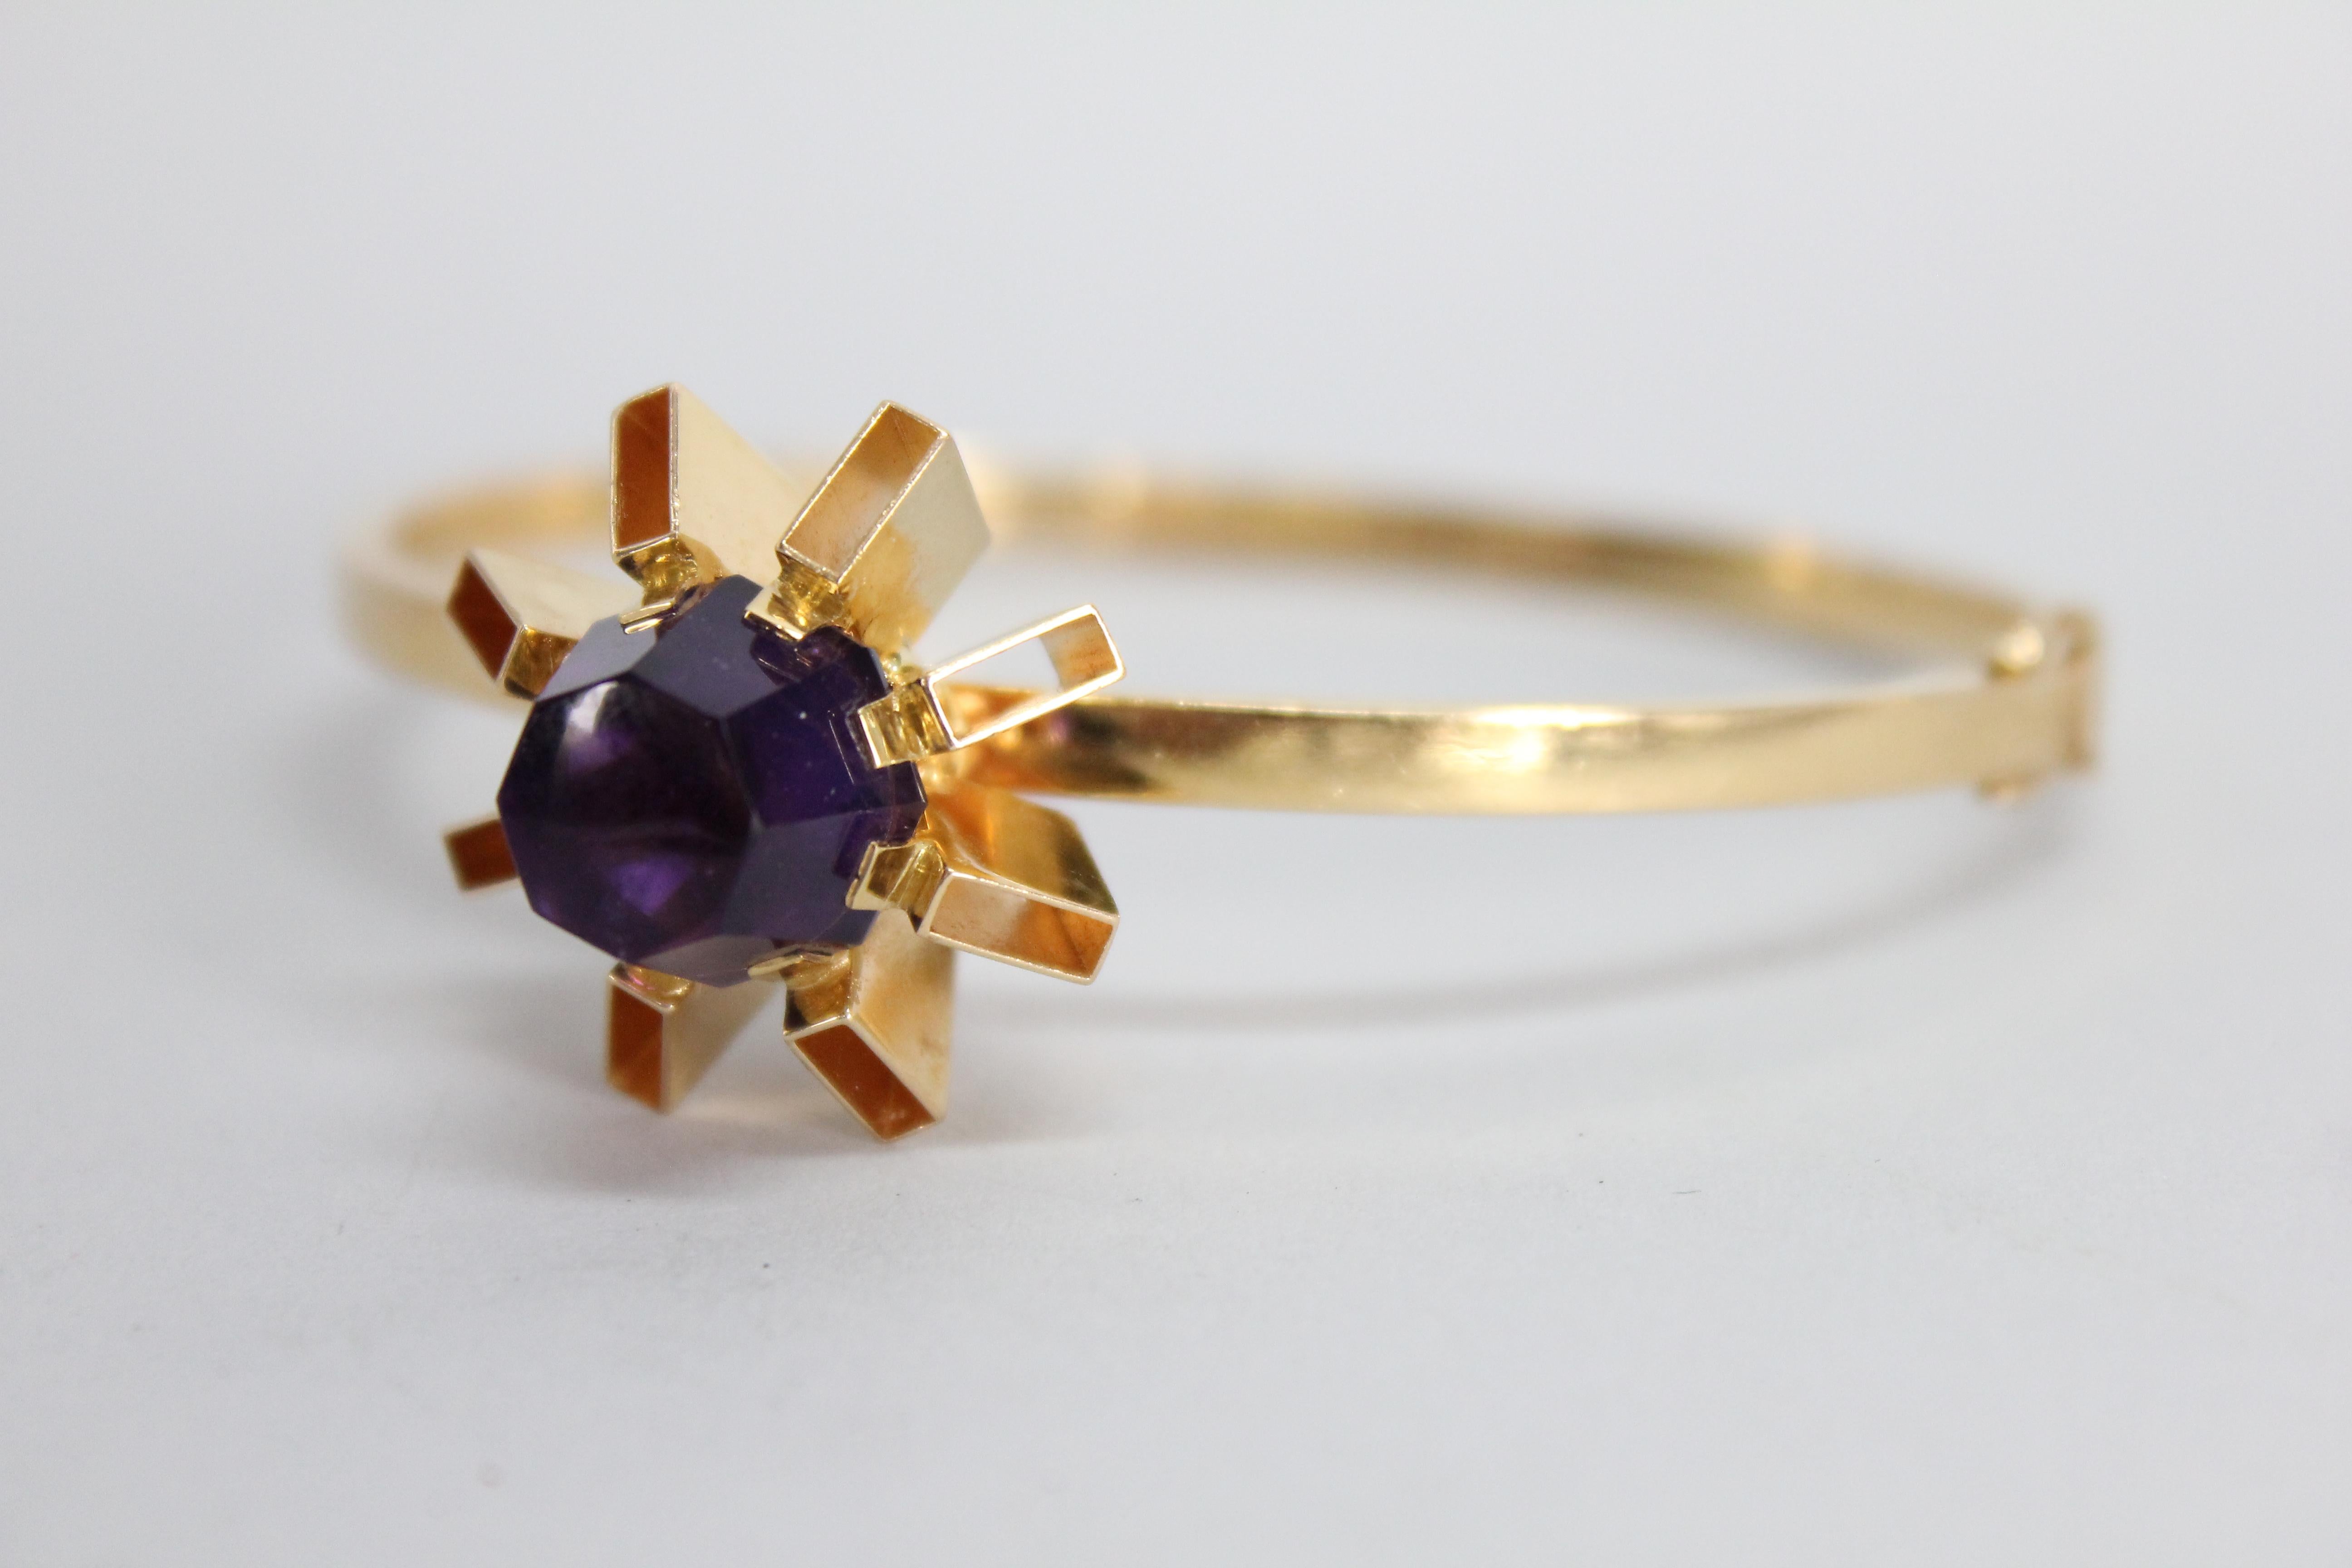 Wonderful modernist 18k gold bracelet by Swedish designer Stigbert.
Made for Engelbert Heribert in Stockholm 1963. Made in 18k gold with a wonderful large amethyst. Total weight 16 grams. The amethyst's diameter is 12mm (1.2cm).
Fully marked and in